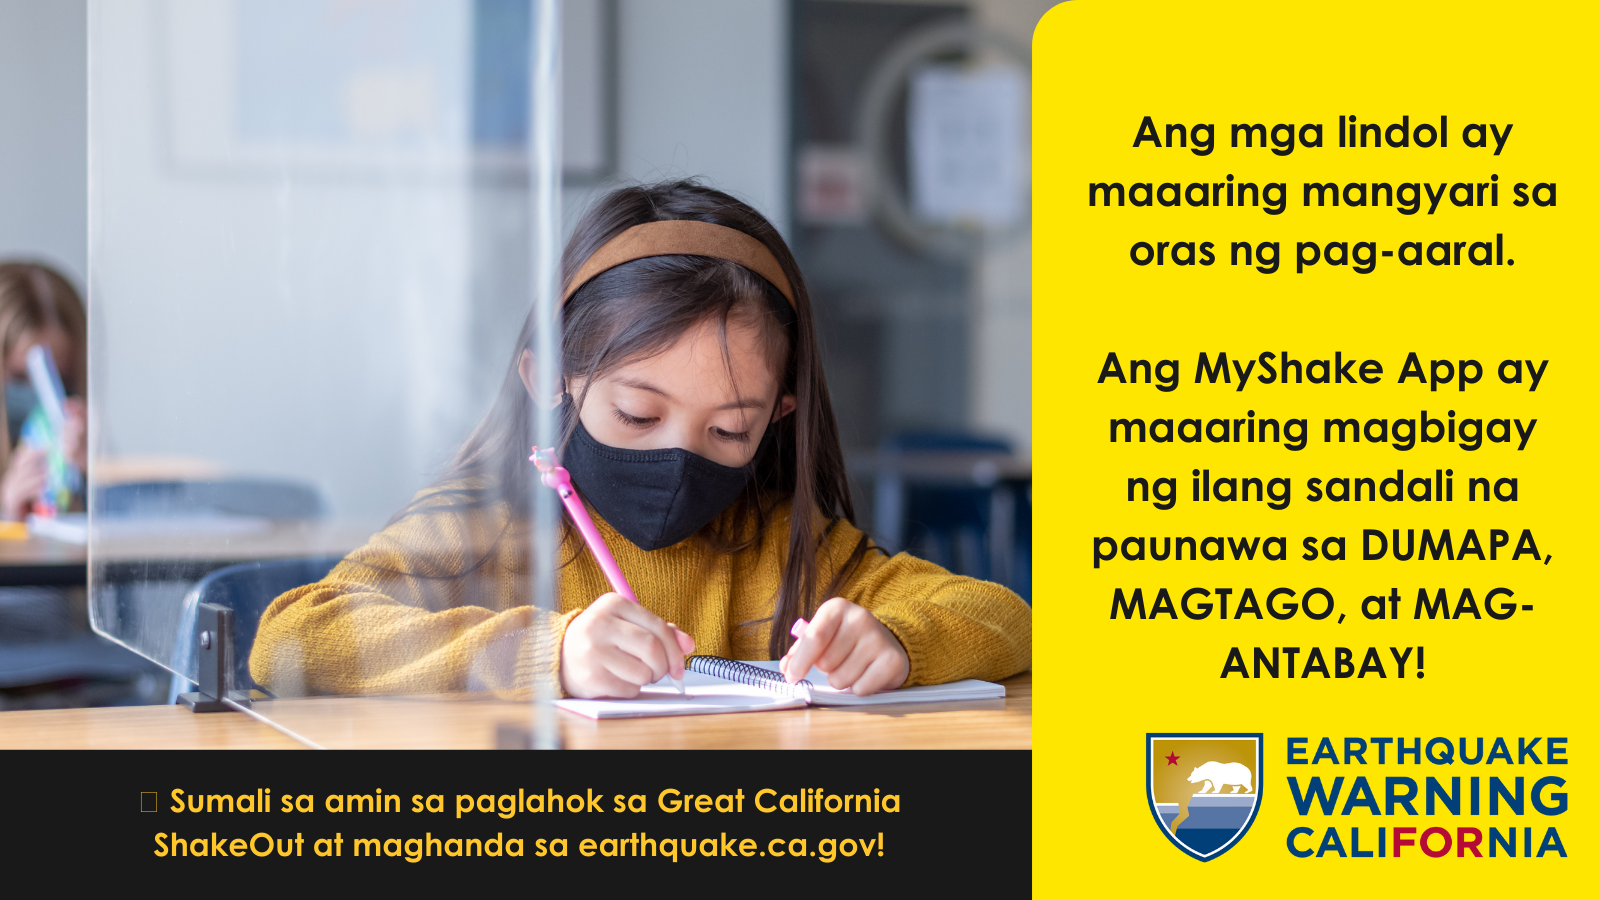 article about education tagalog